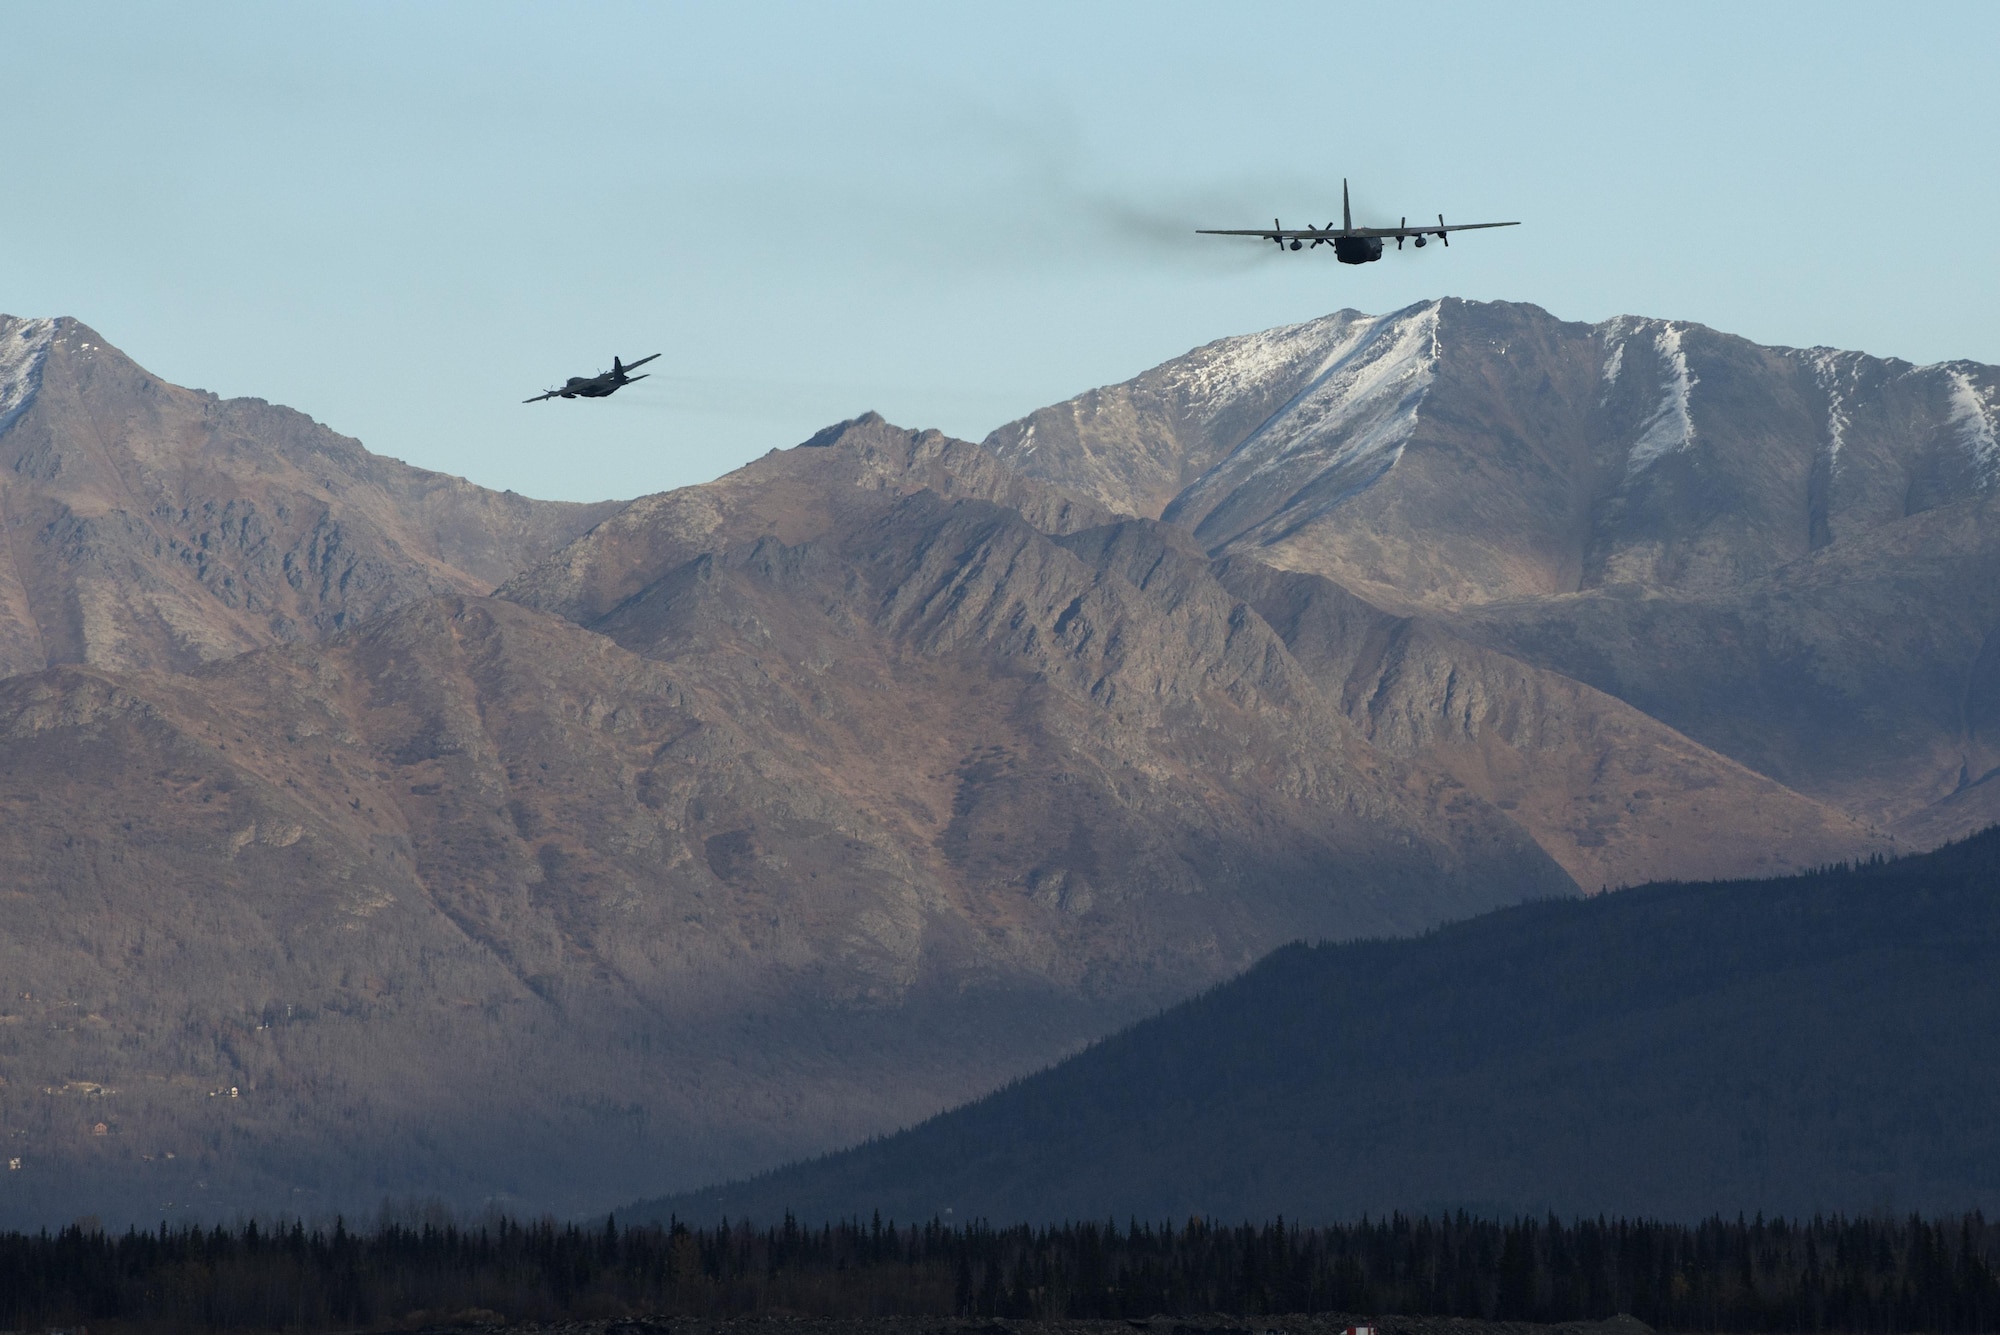 Two Republic of Korea Air Force C-130 Hercules depart Joint Base Elmendorf-Richardson during Red Flag - Alaska 17-1 Oct. 12, 2016. RF-A is a joint exercise focused on improving combat readiness of the U.S. military and international forces, which included the ROKAF and Royal New Zealand Air Force this iteration.